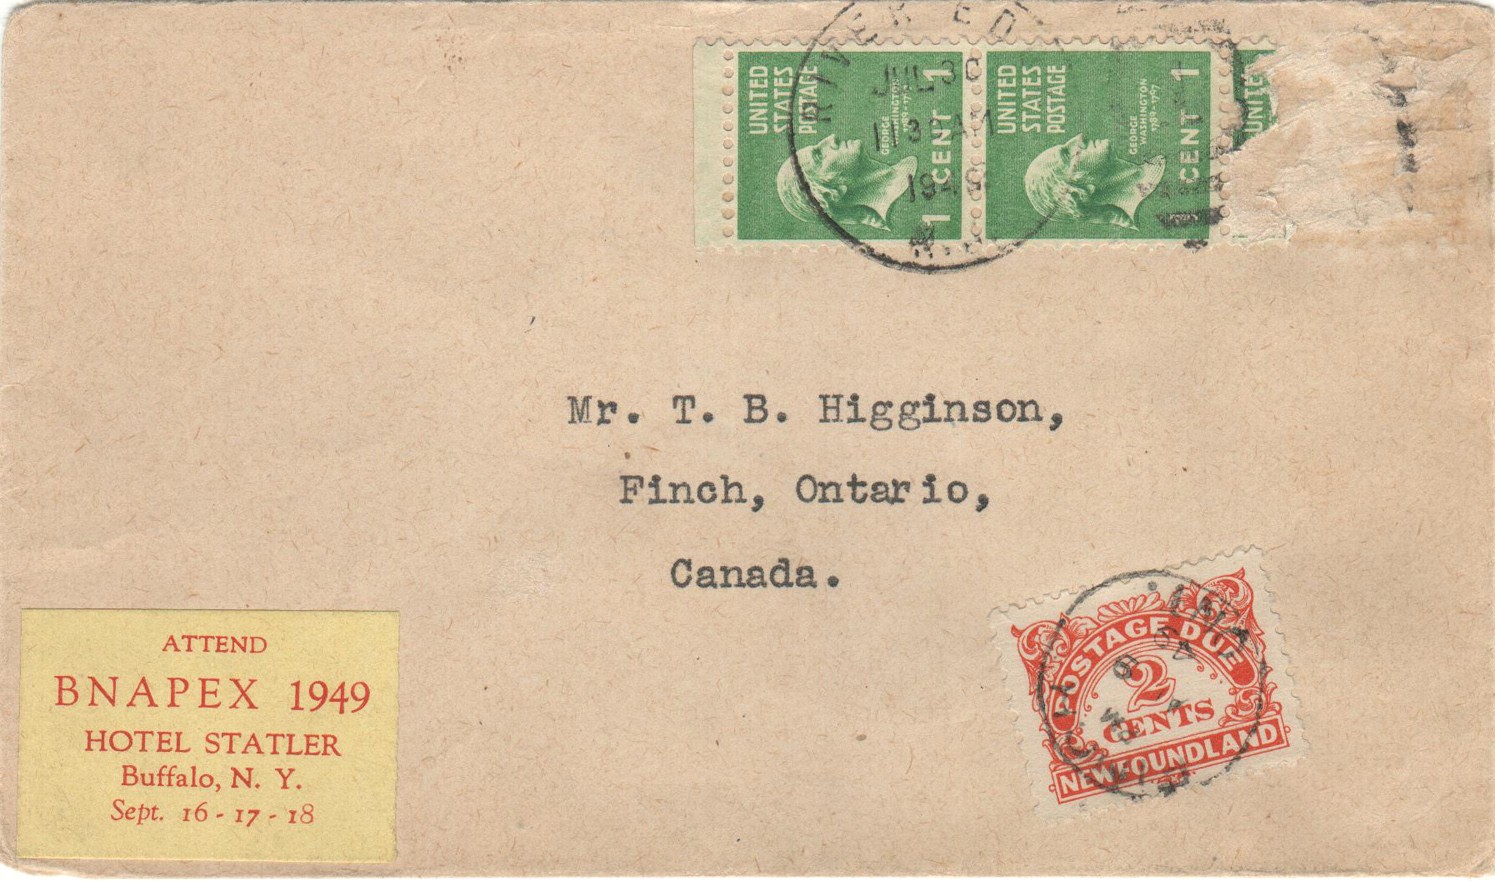 Cover with BNAPEX 1949 sticker